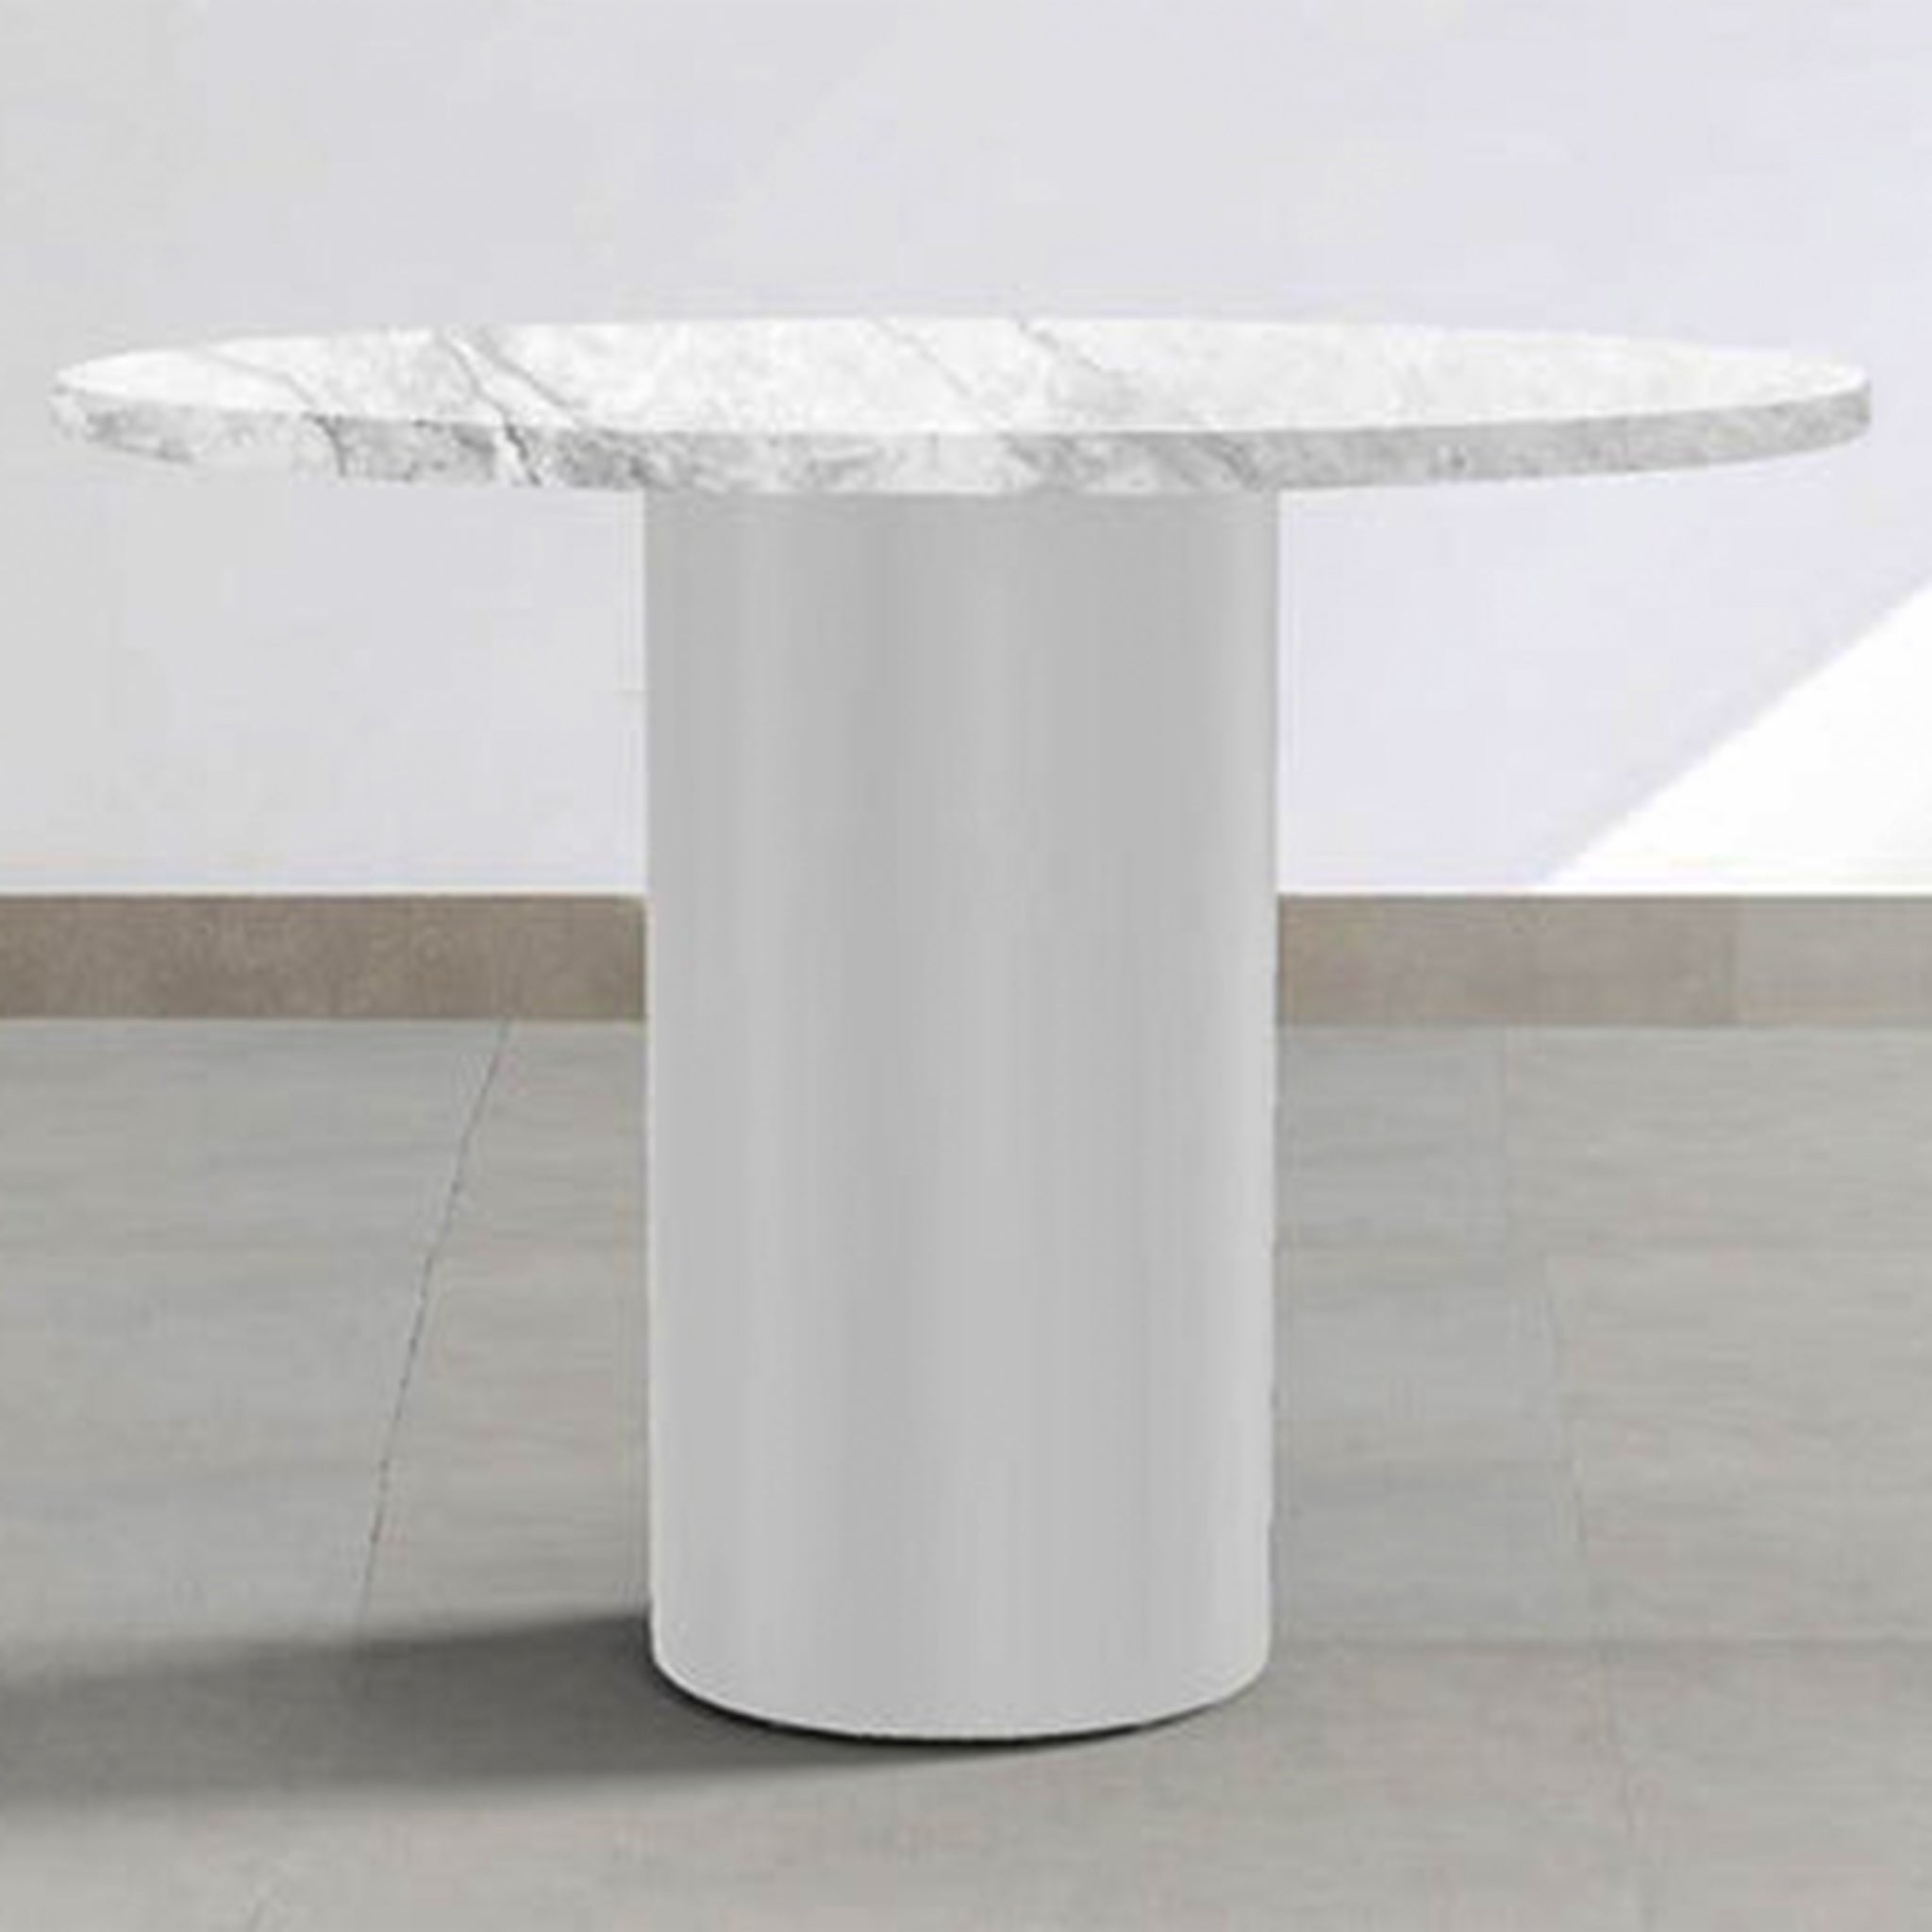 Console-style side table with a long and sleek design.